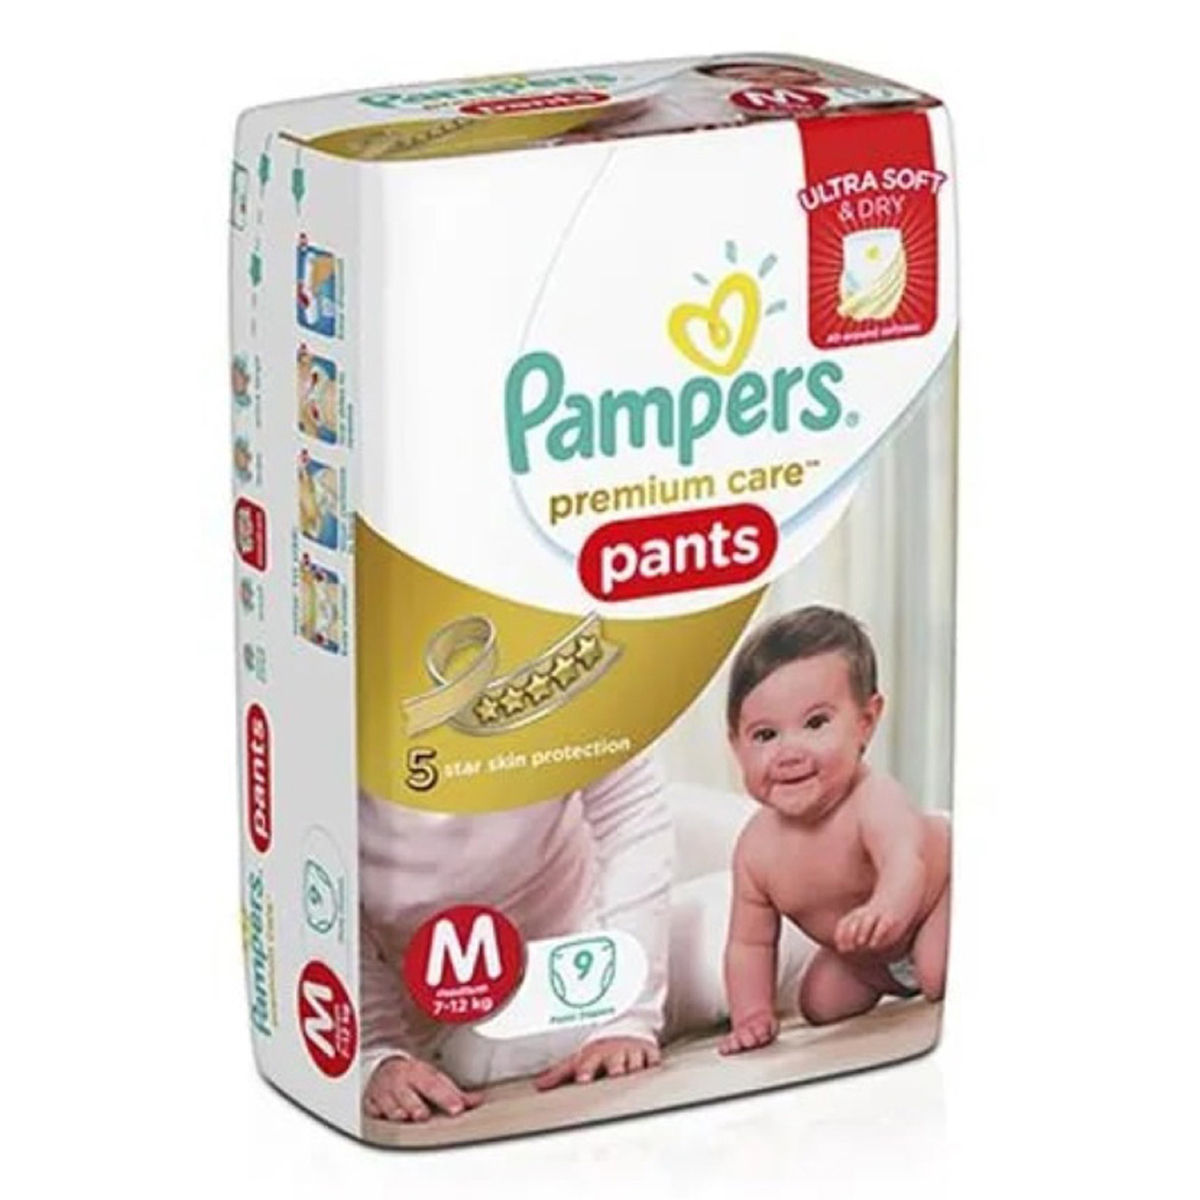 Pampers Premium Care Pants, Medium size baby diapers (M), 38 Count, Softest  ever Pampers pants – JUNIOR SHOP.in